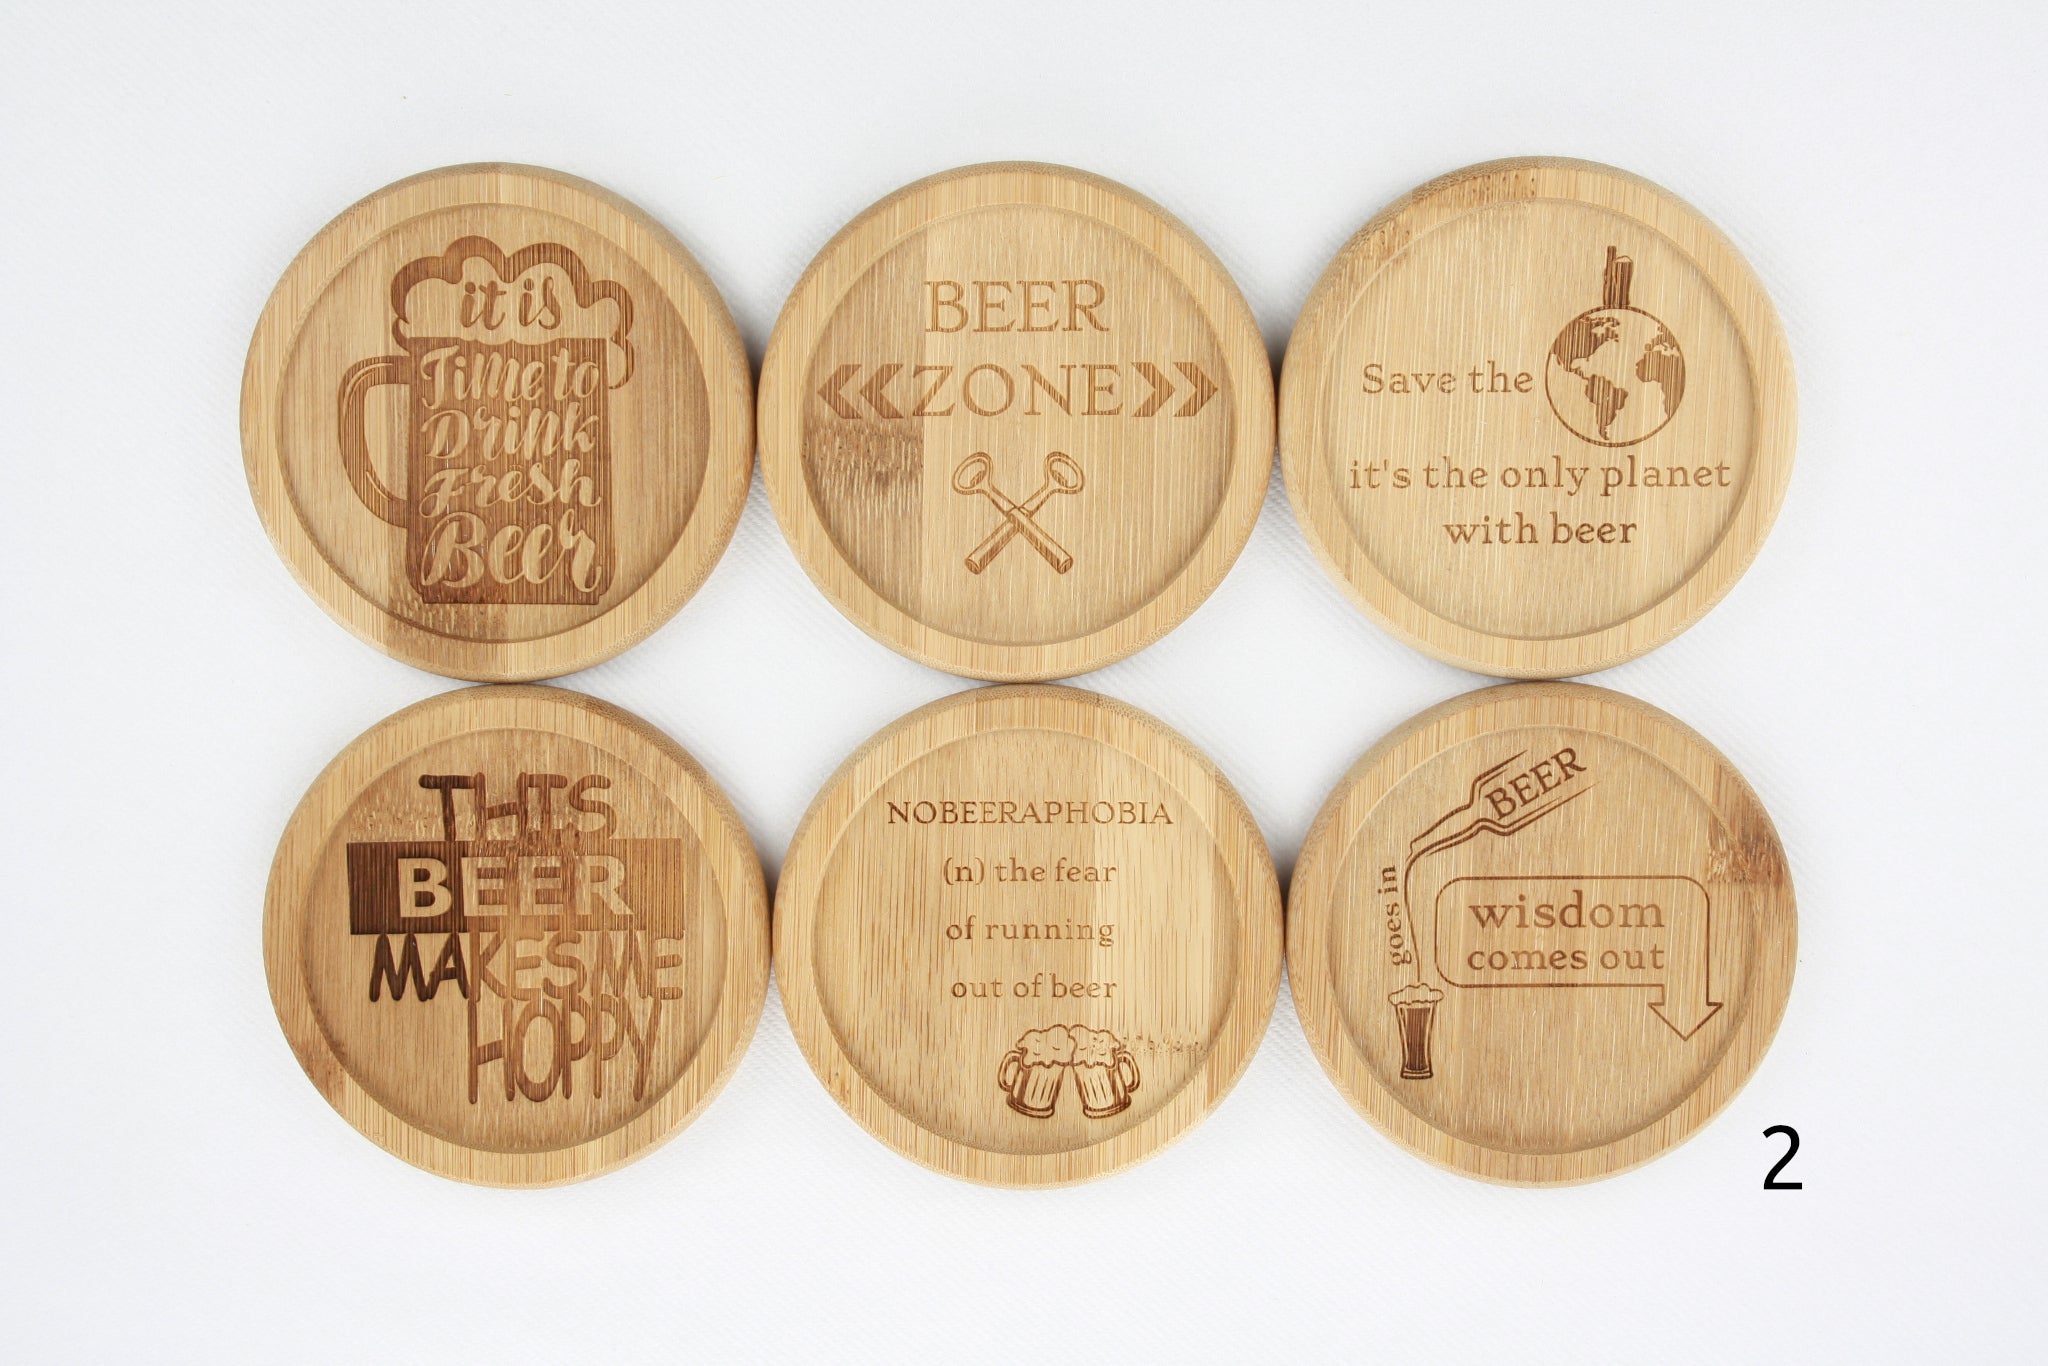 Bamboe onderleggers met bier quotes. 'It is time to drink fresh beer', 'Beer zone', 'Save the planet, it's the only planet with beer', 'This beer makes me hoppy', 'Nobeeraphobia, the fear of running out of beer', 'Beer goes in, wisdom comes out'.